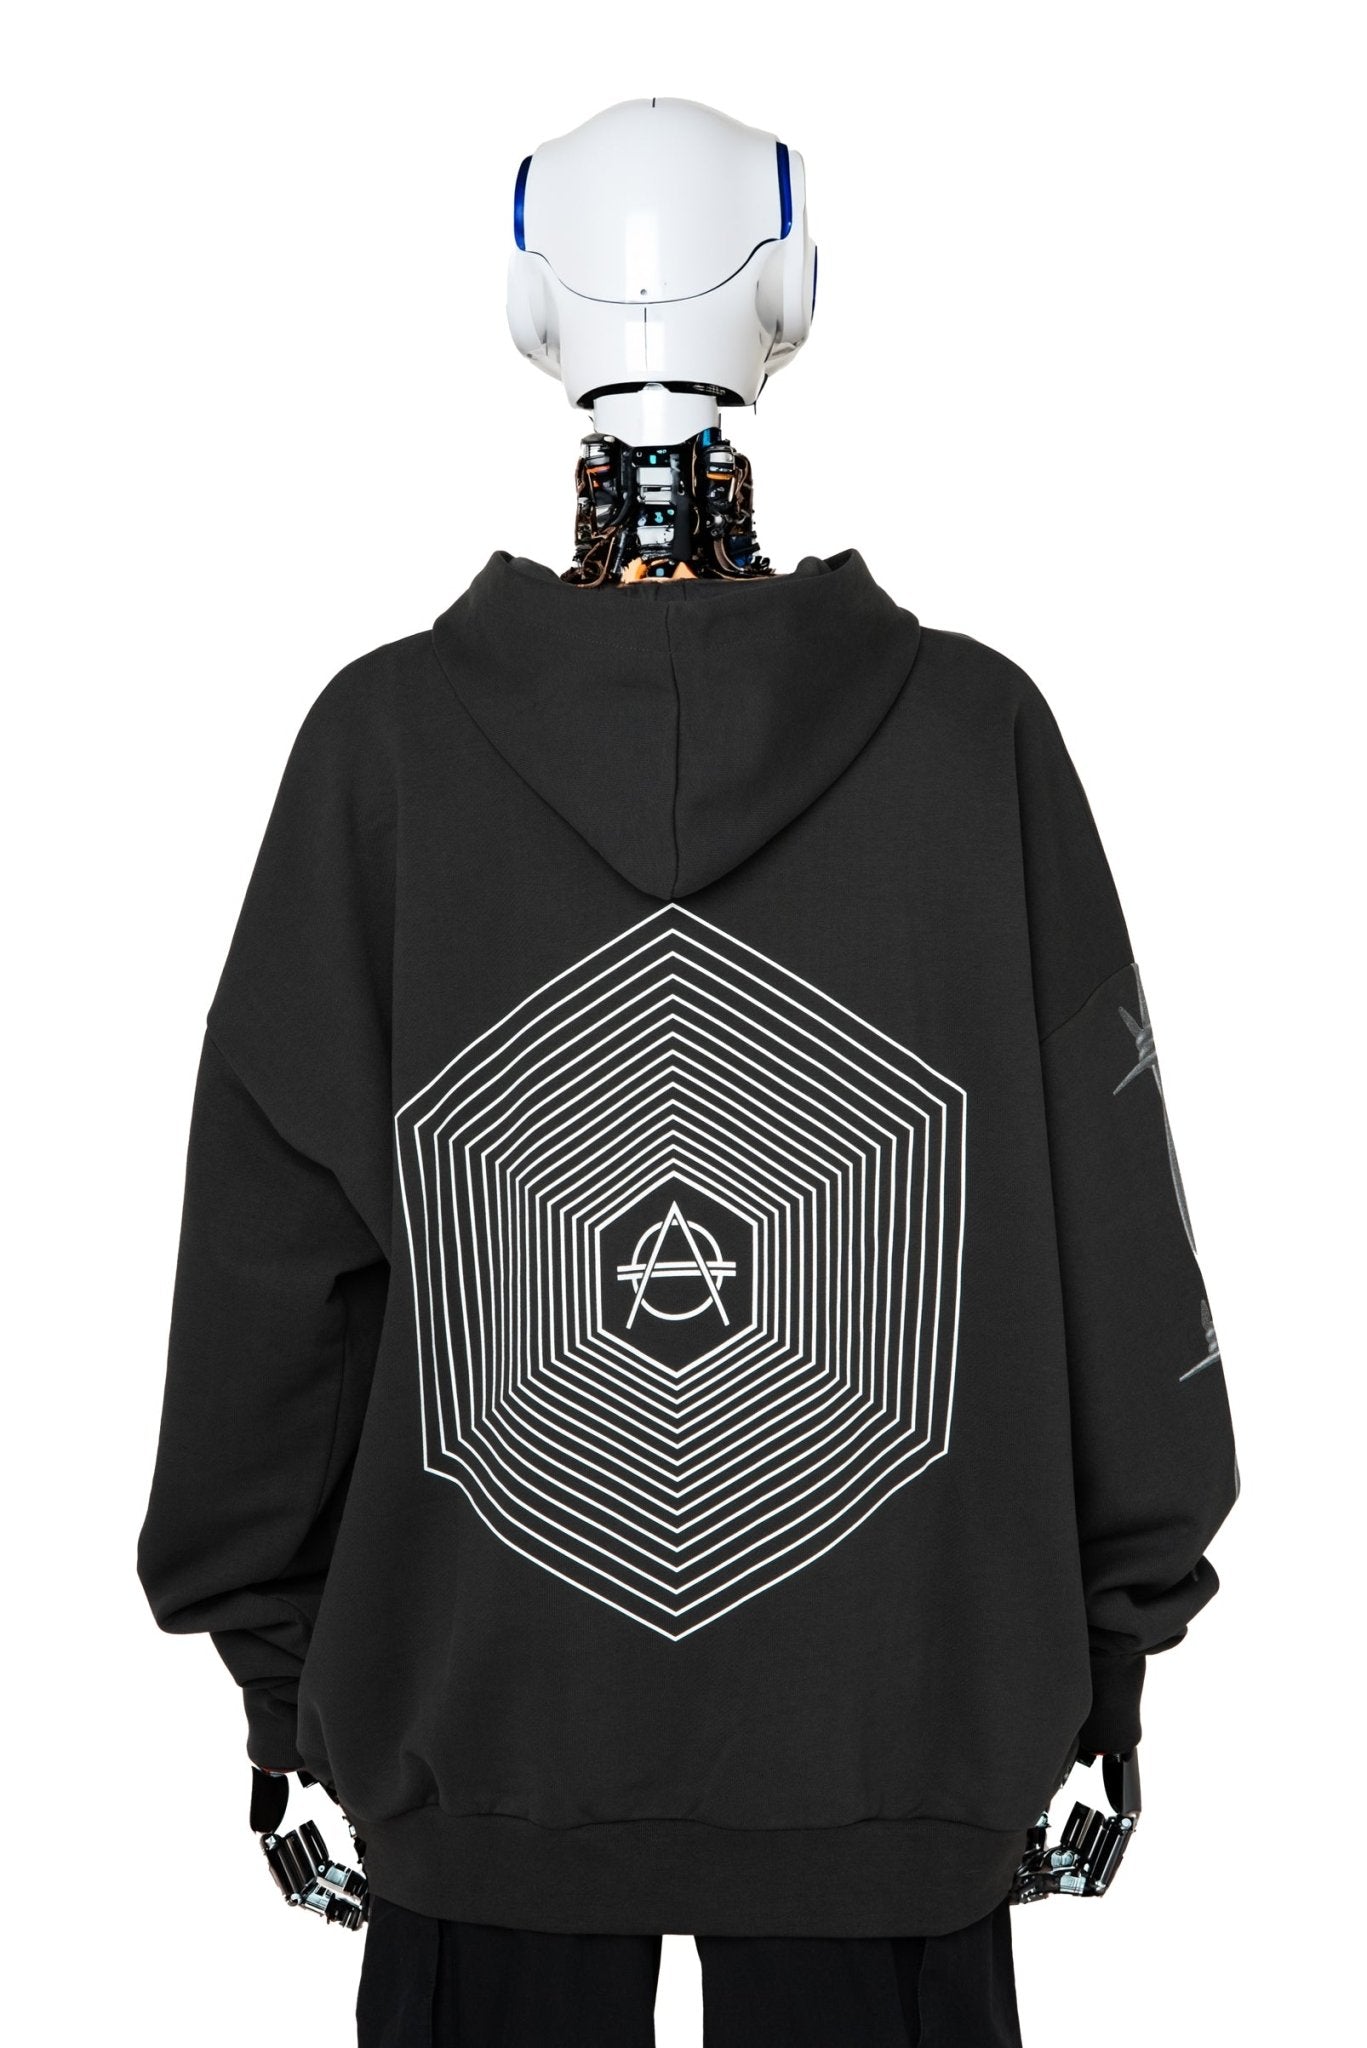 HEXAGON CLOTHING - Futuristic Clothing from the mind of Don Diablo